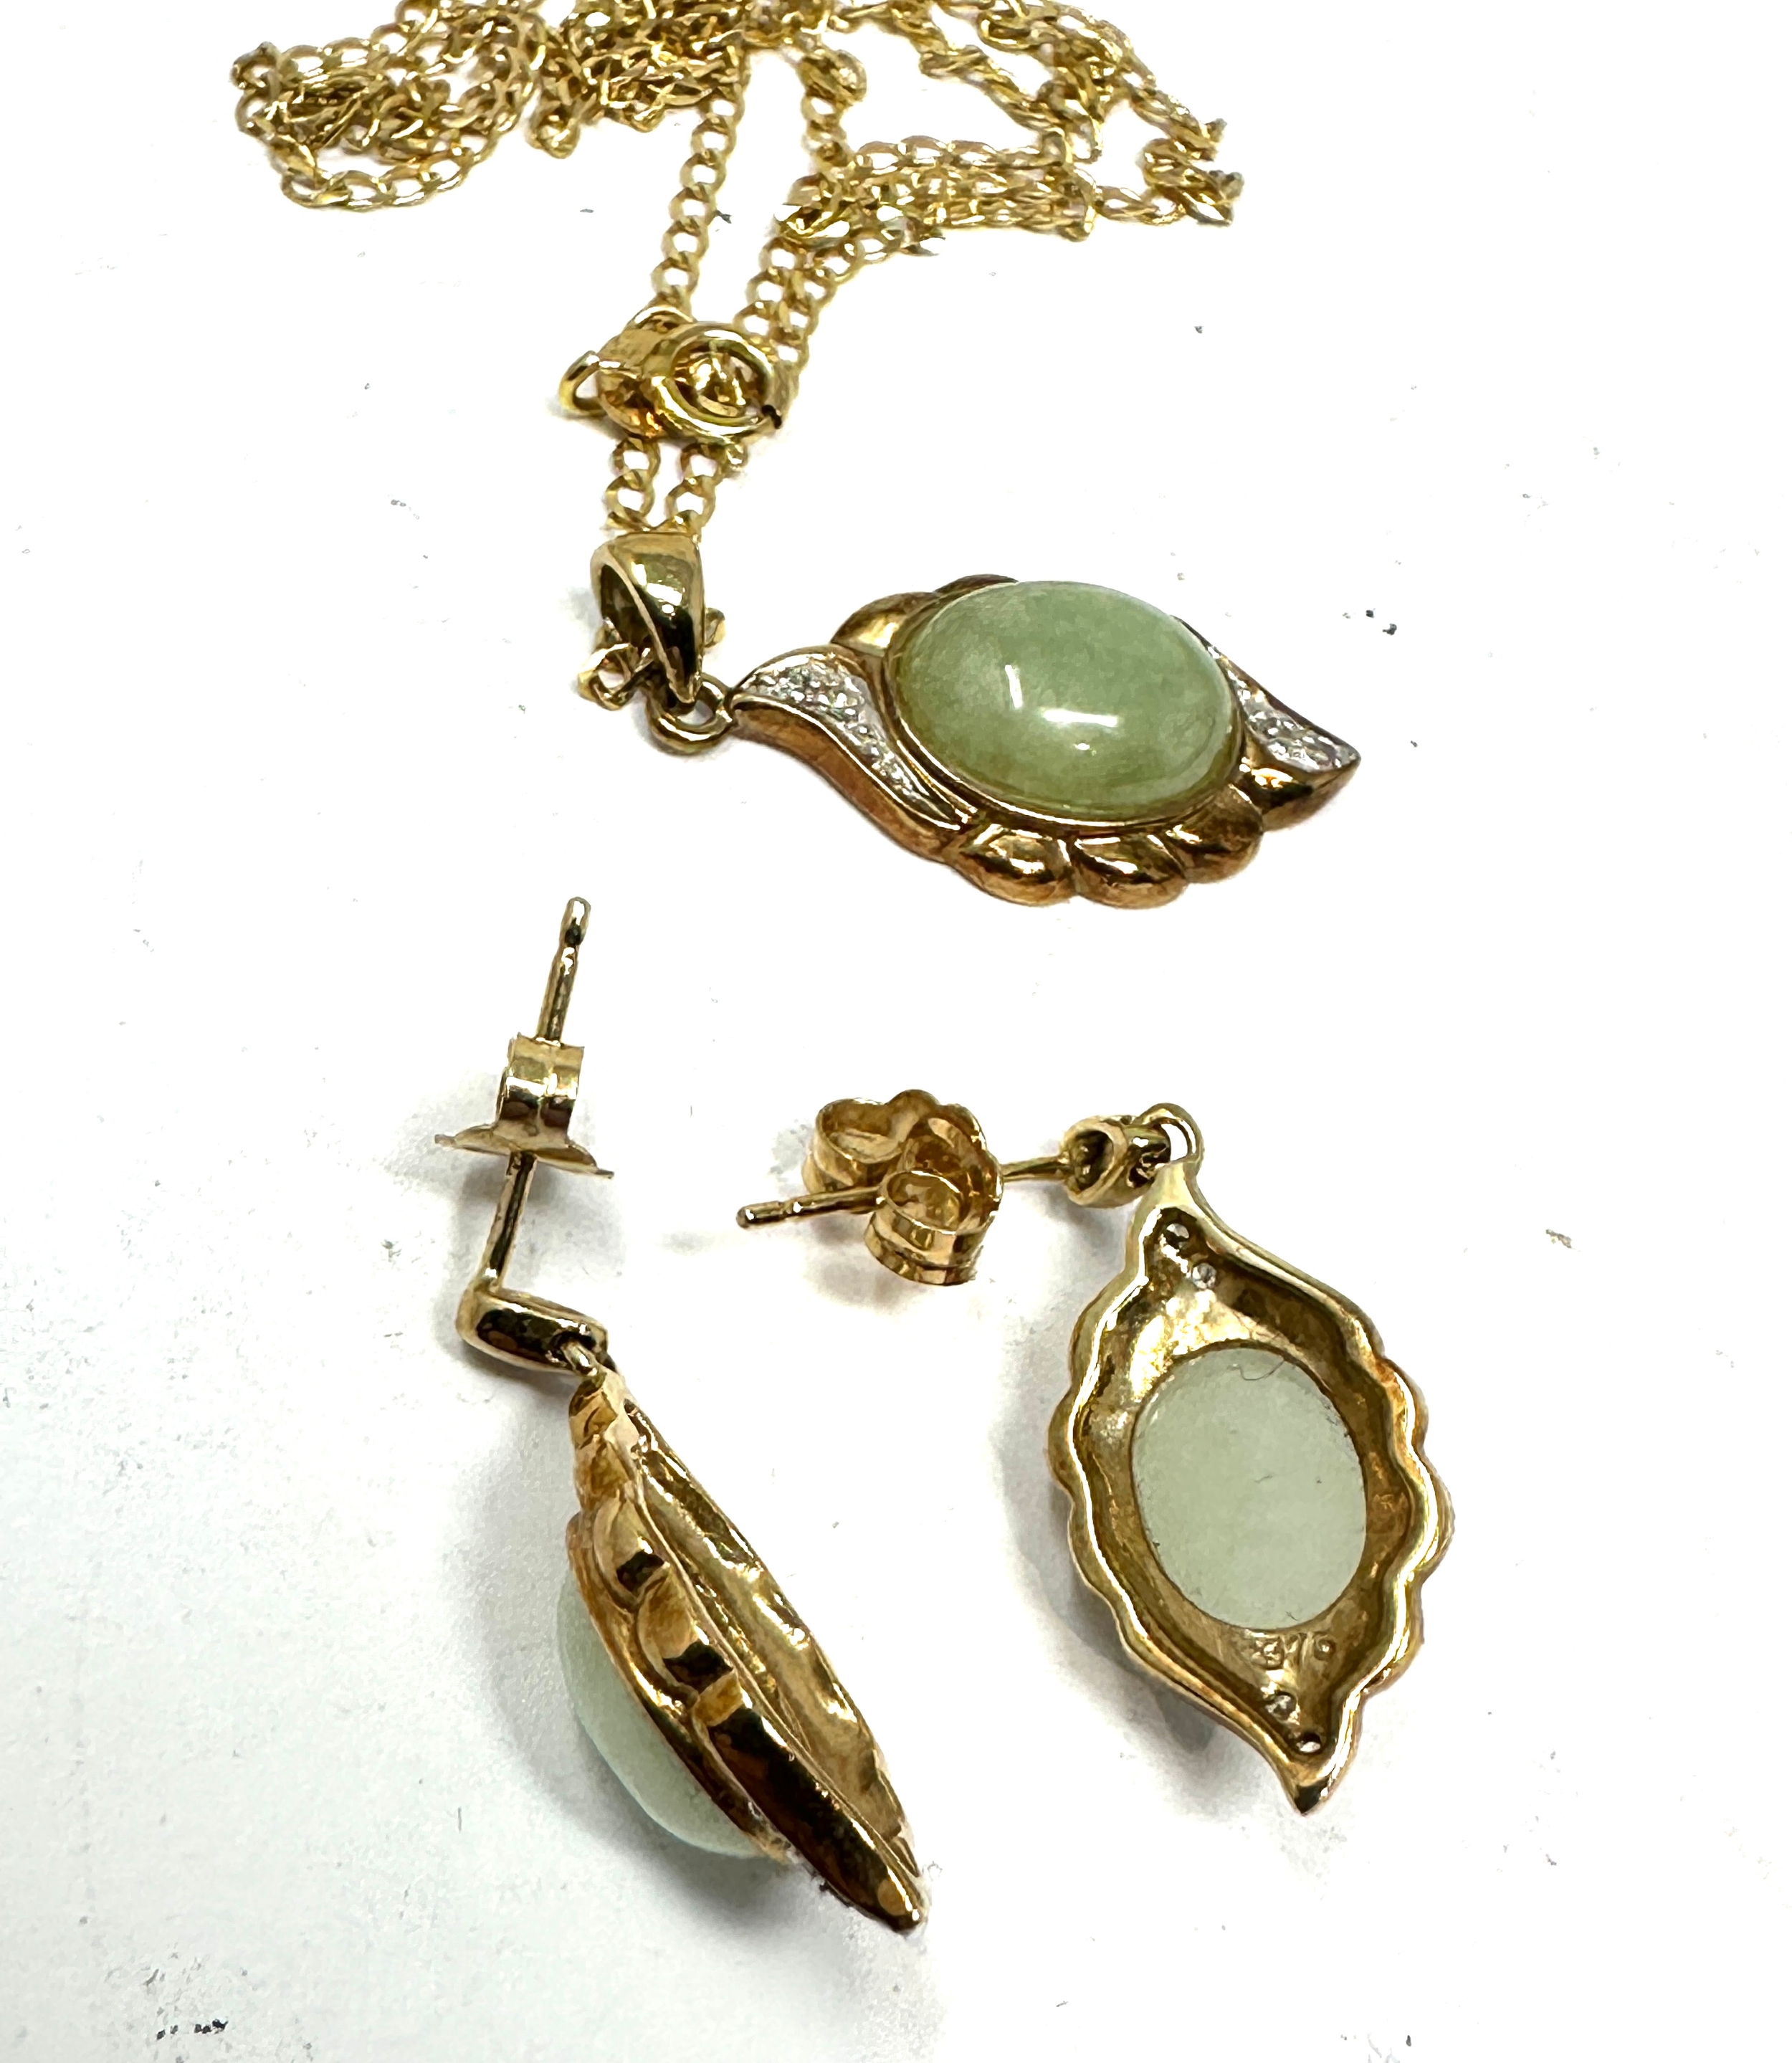 9ct gold diamond & jade pendant necklace & earring set weight 6.6g - Image 4 of 4